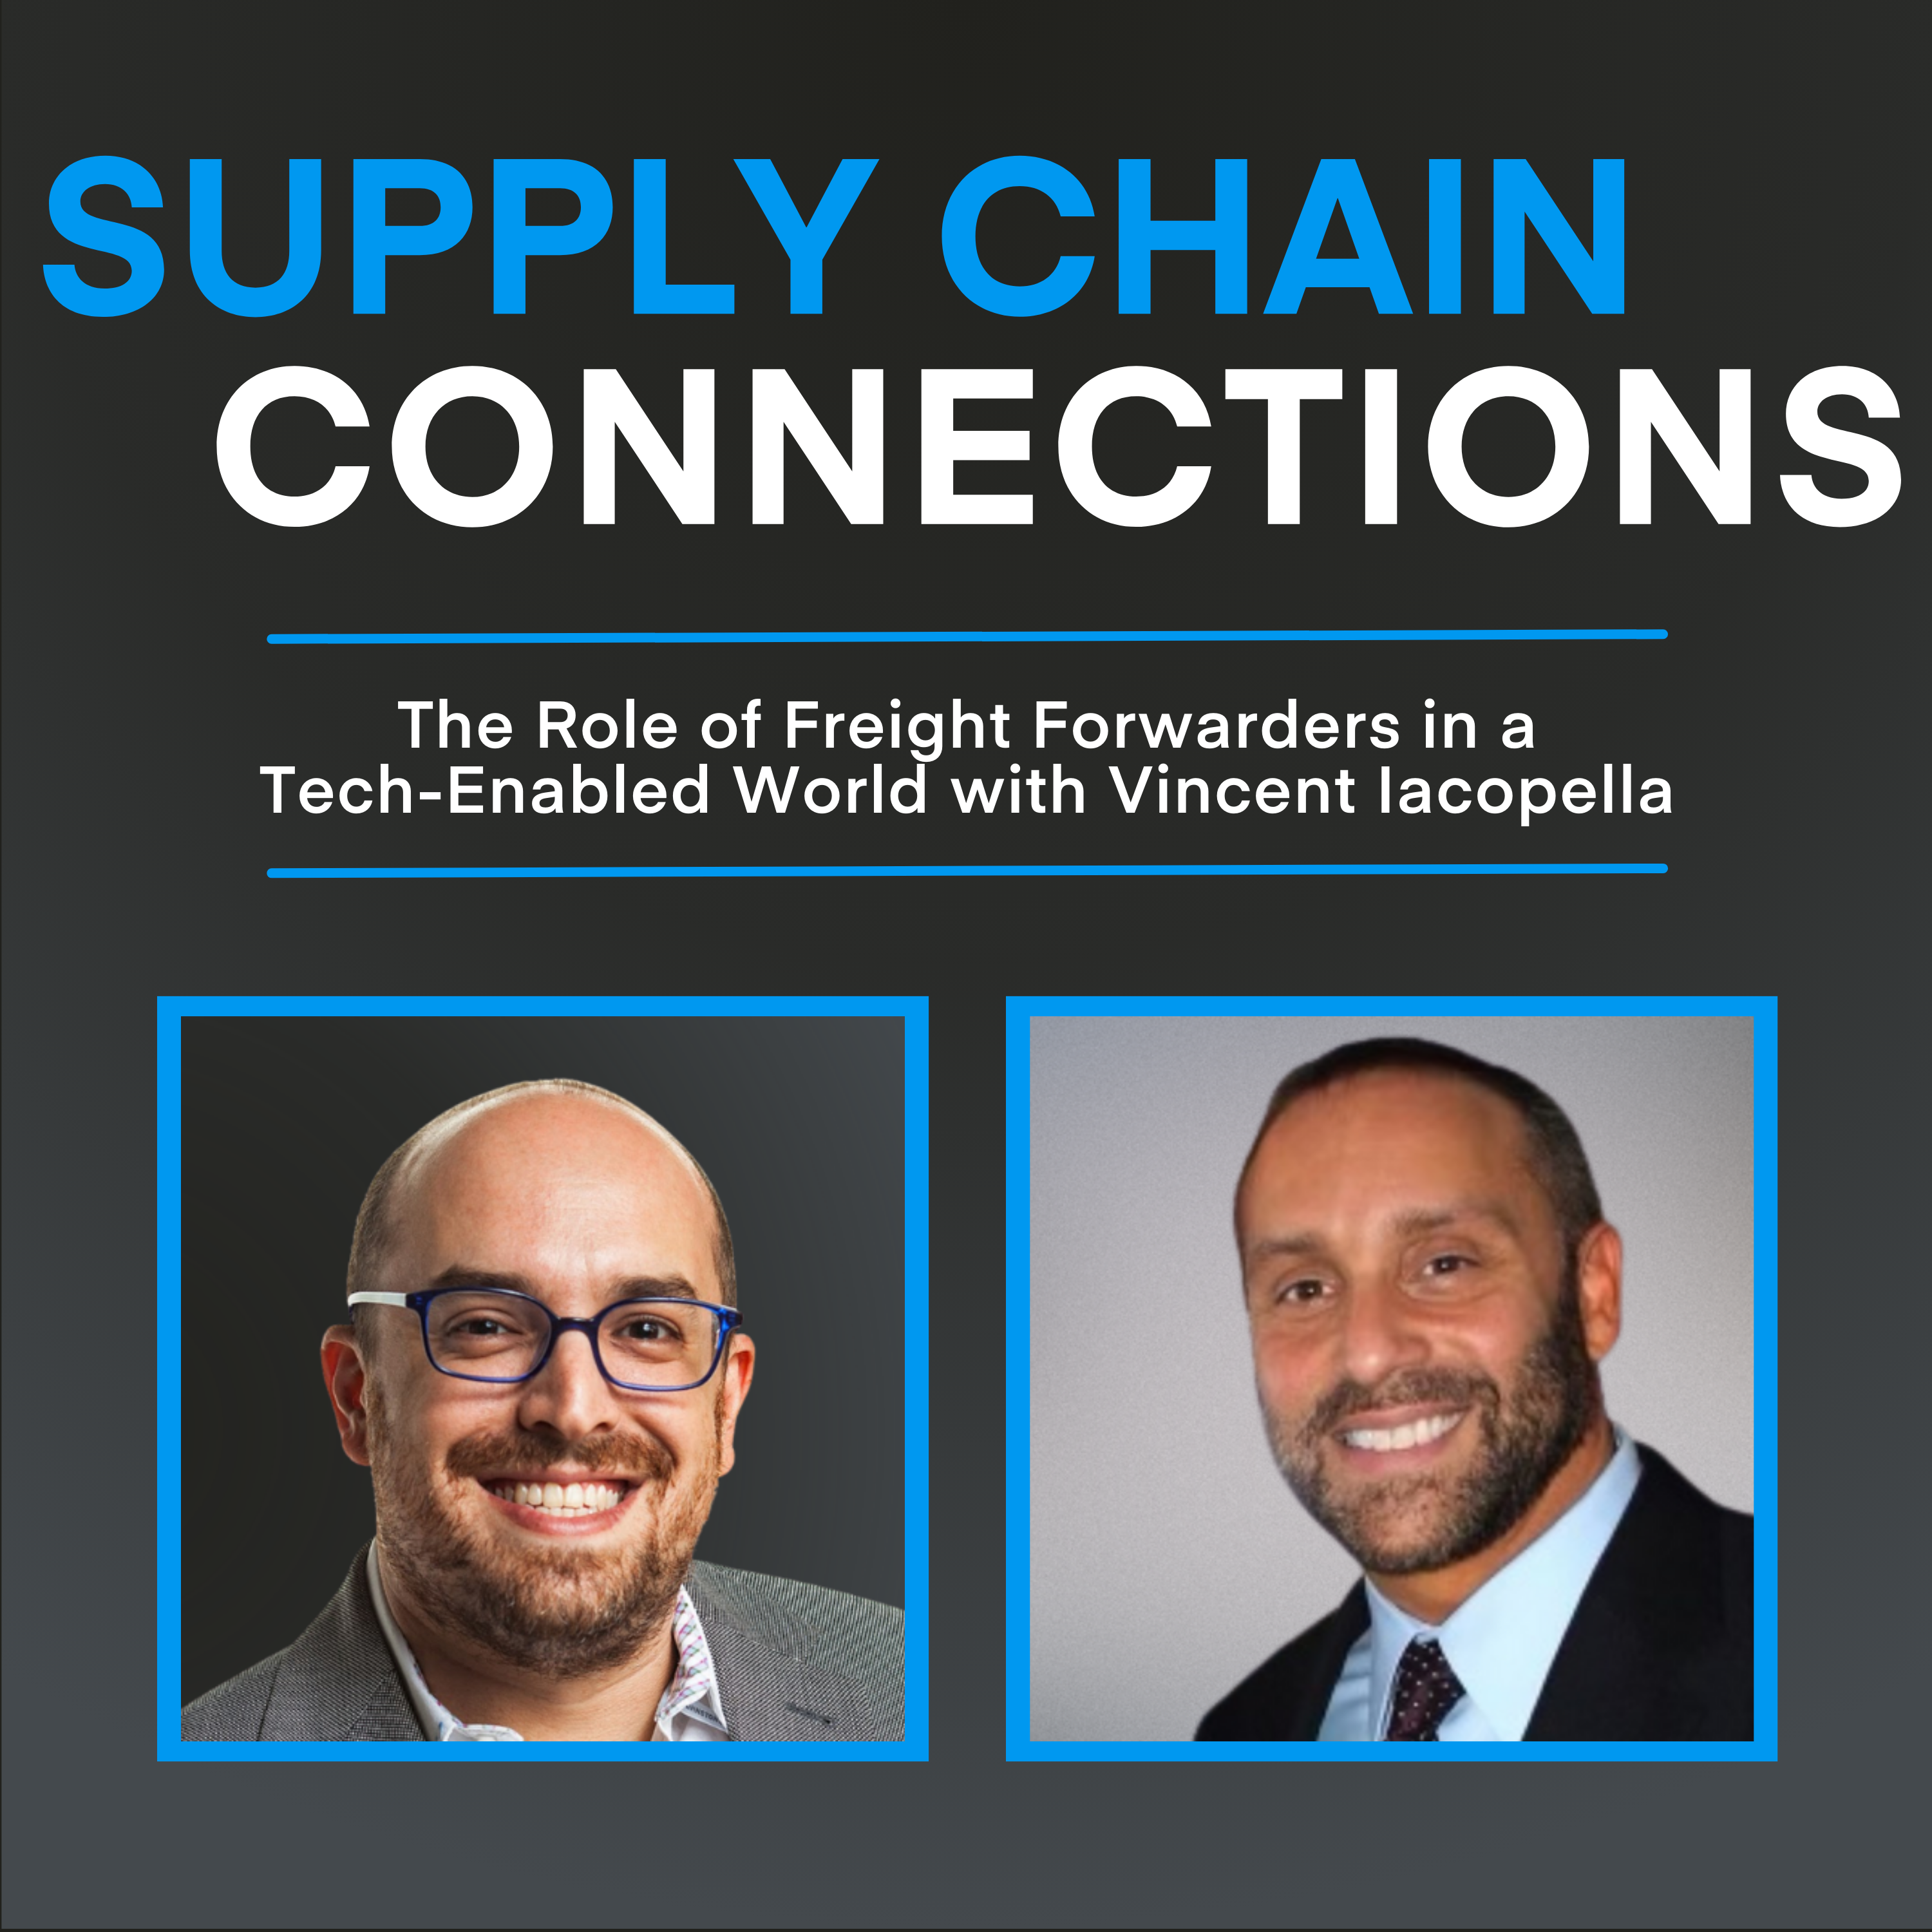 The Role of Freight Forwarders in a Tech-Enabled World with Vincent Iacopella